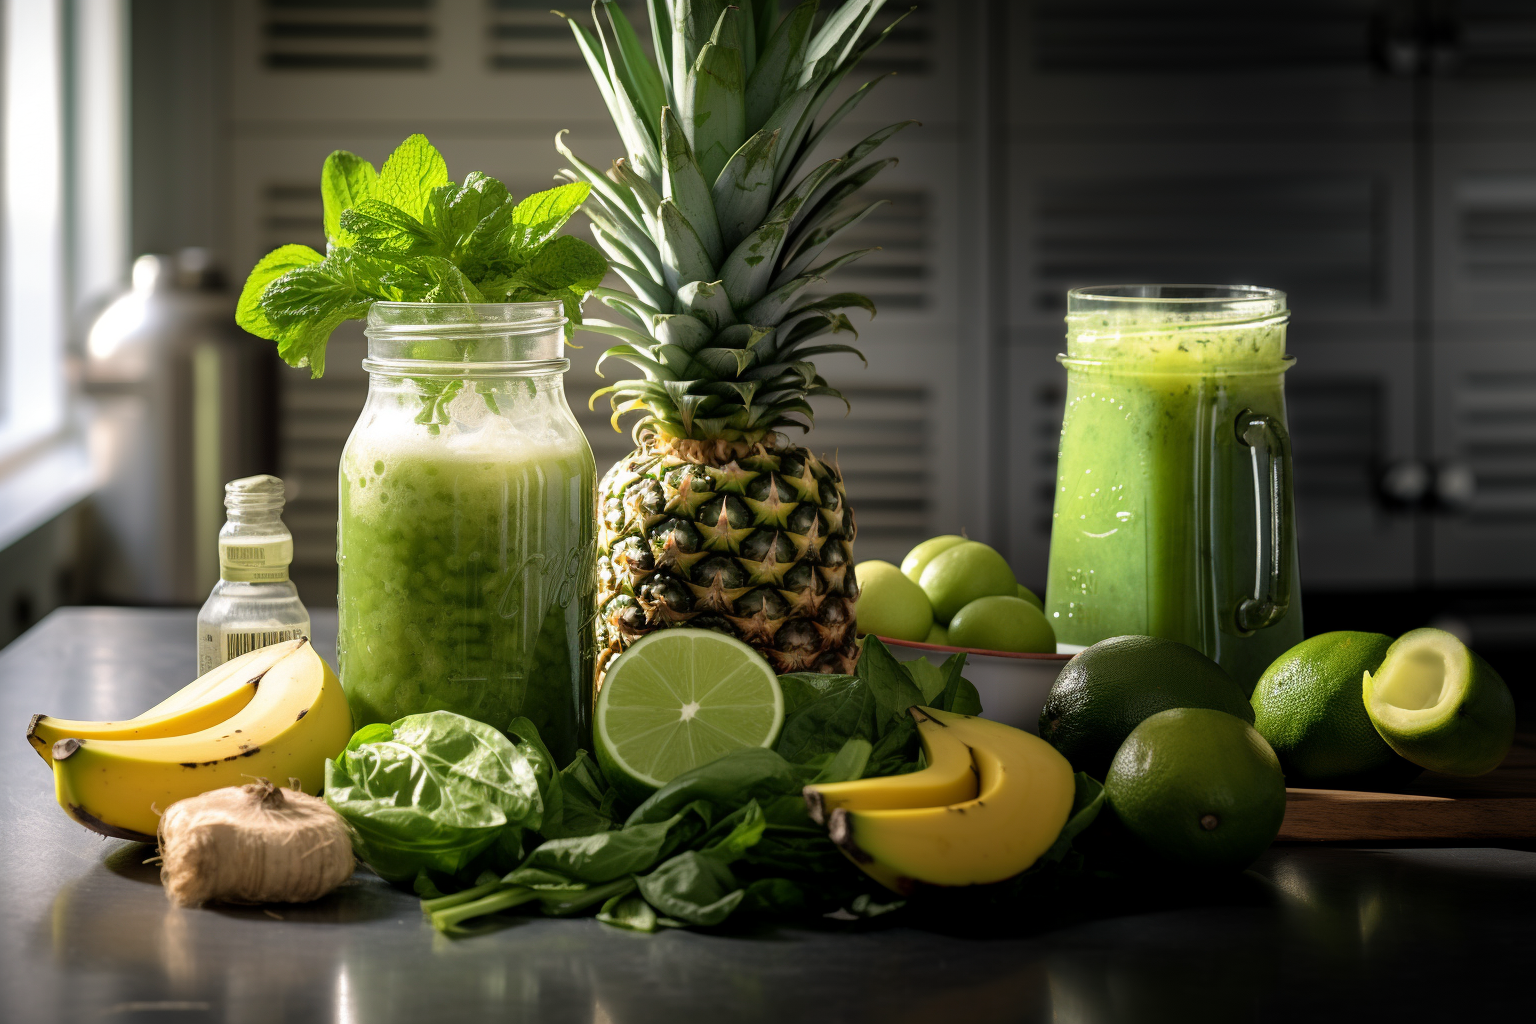 A pitcher of Rewind pineapple dream greens smoothie on top of the kitchen counter together with its key ingredients pineapple, banana, and greens.